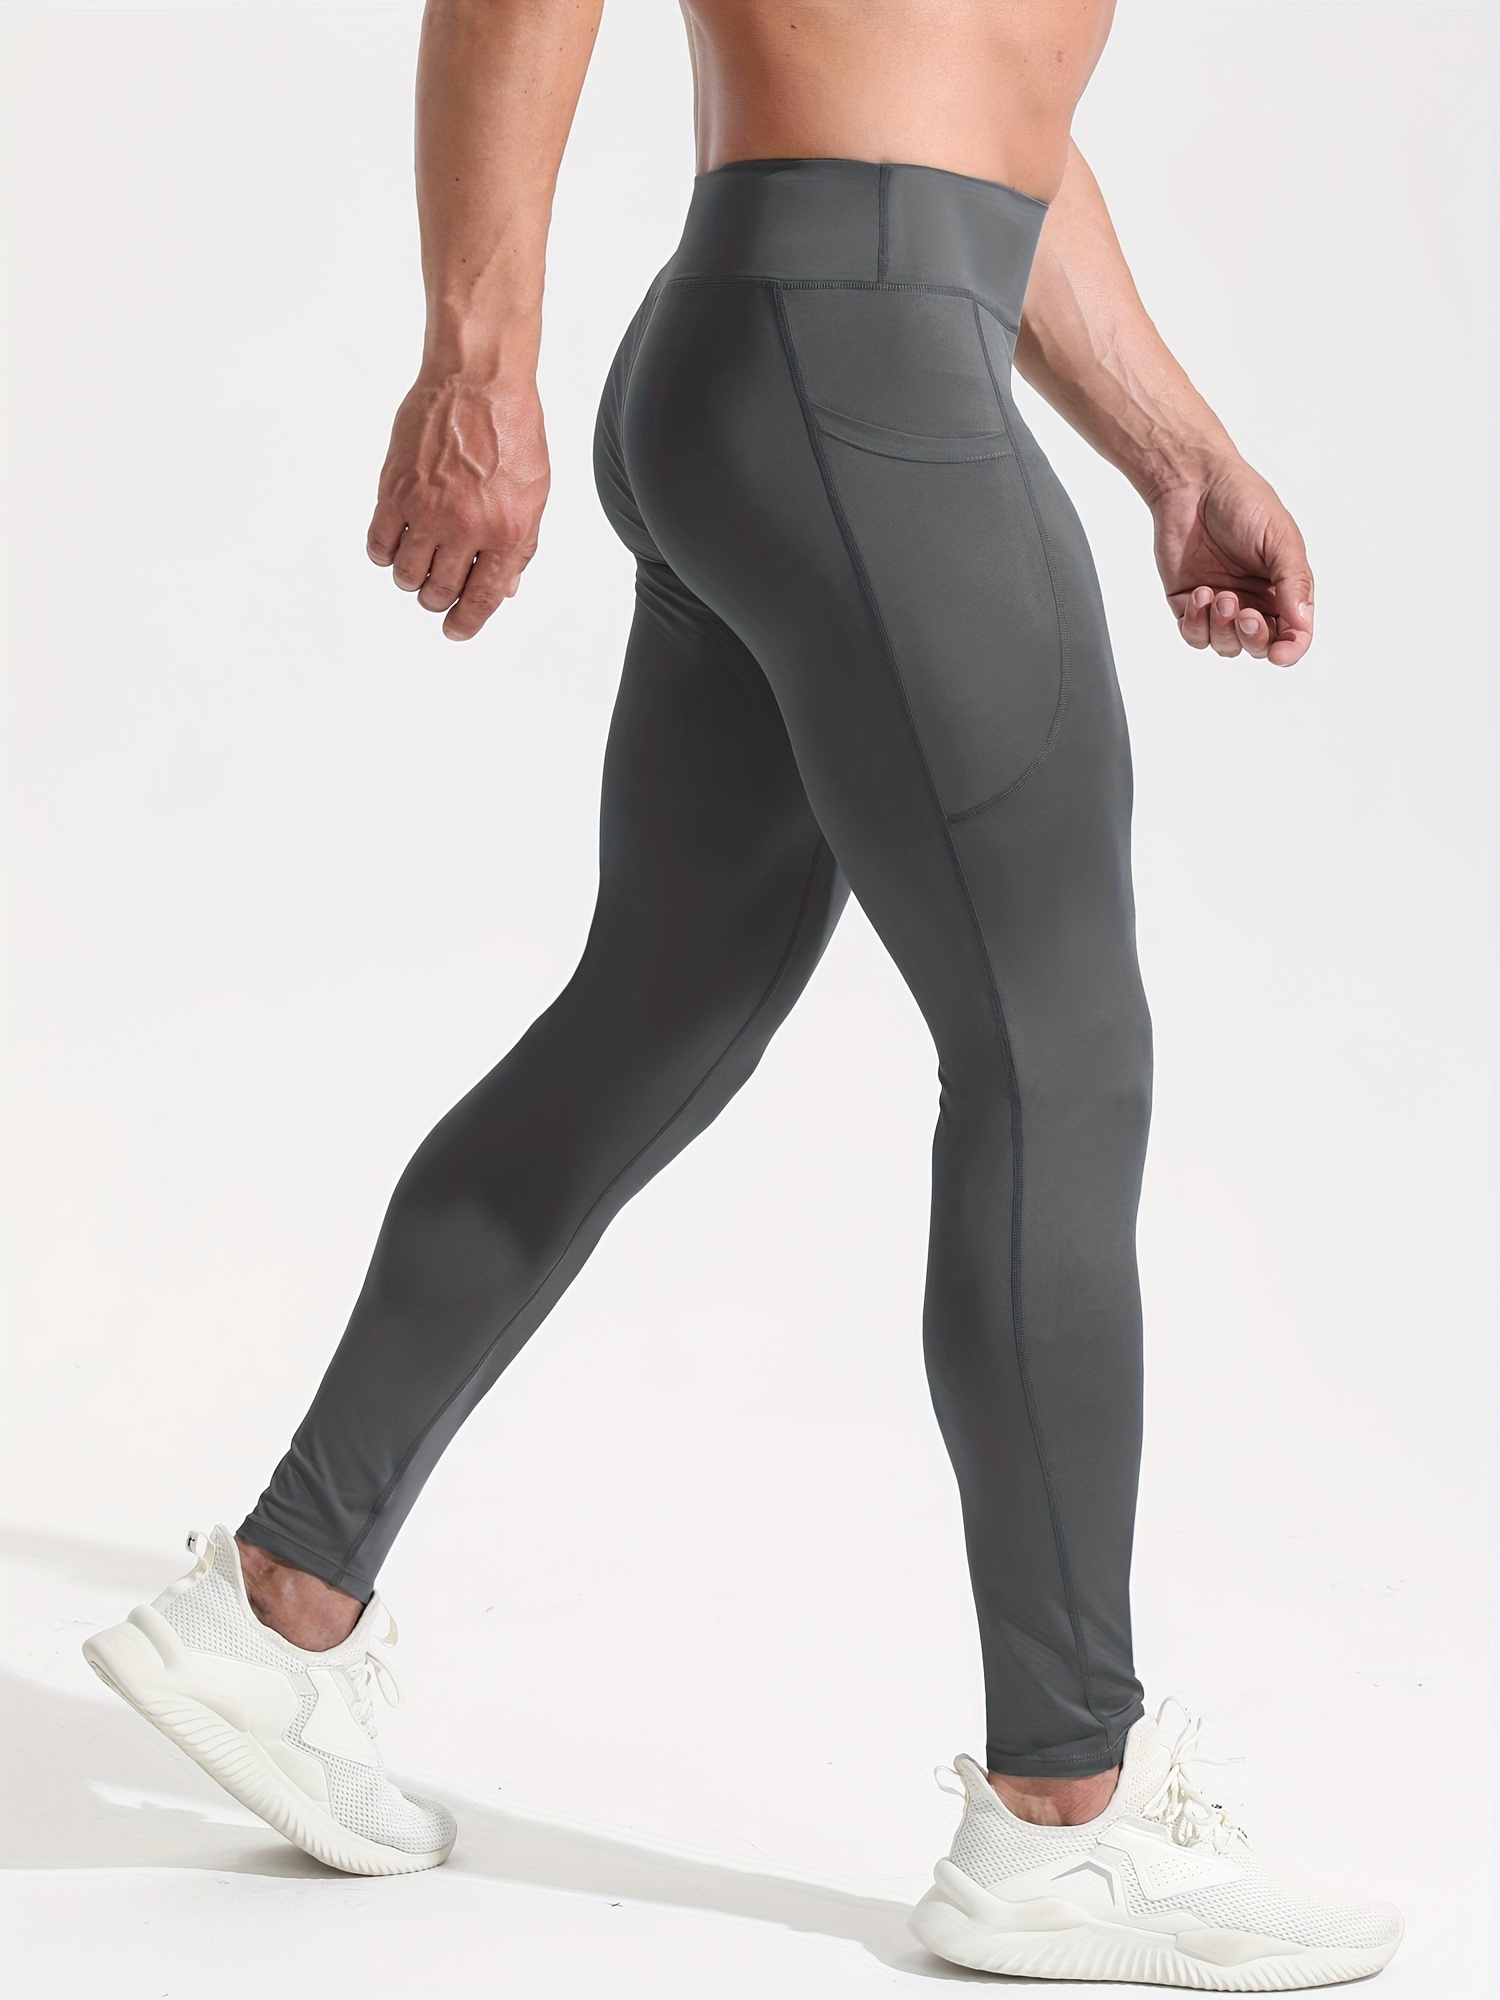 Breathable Quick Dry Compression Compression Leggings For Men Ideal For  Casual Sports, Gym, And Fitness From Ziweilin, $13.07